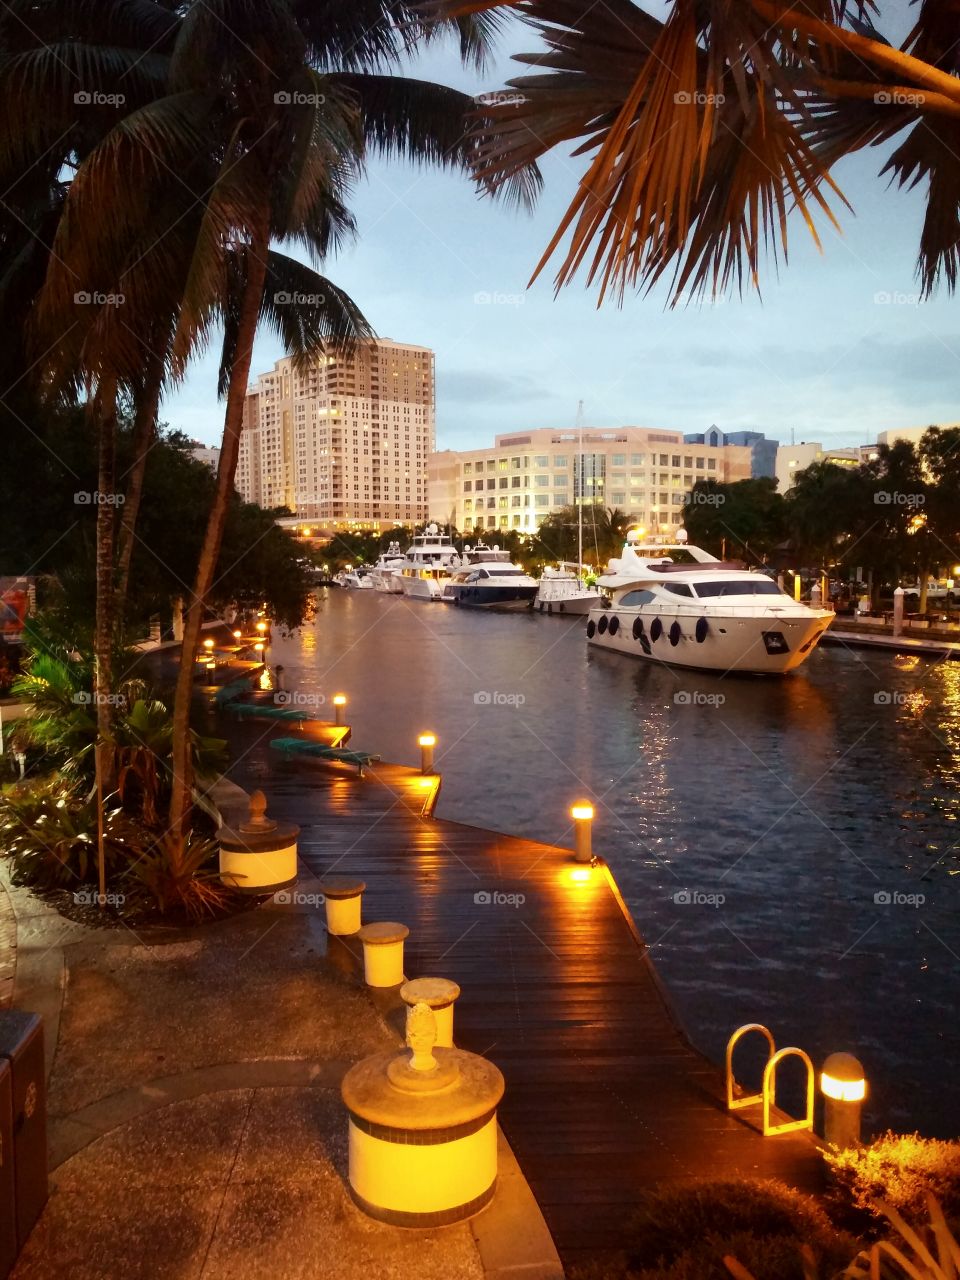 Walks along the new river and Intracoastal waterways are the South Florida lifestyle.